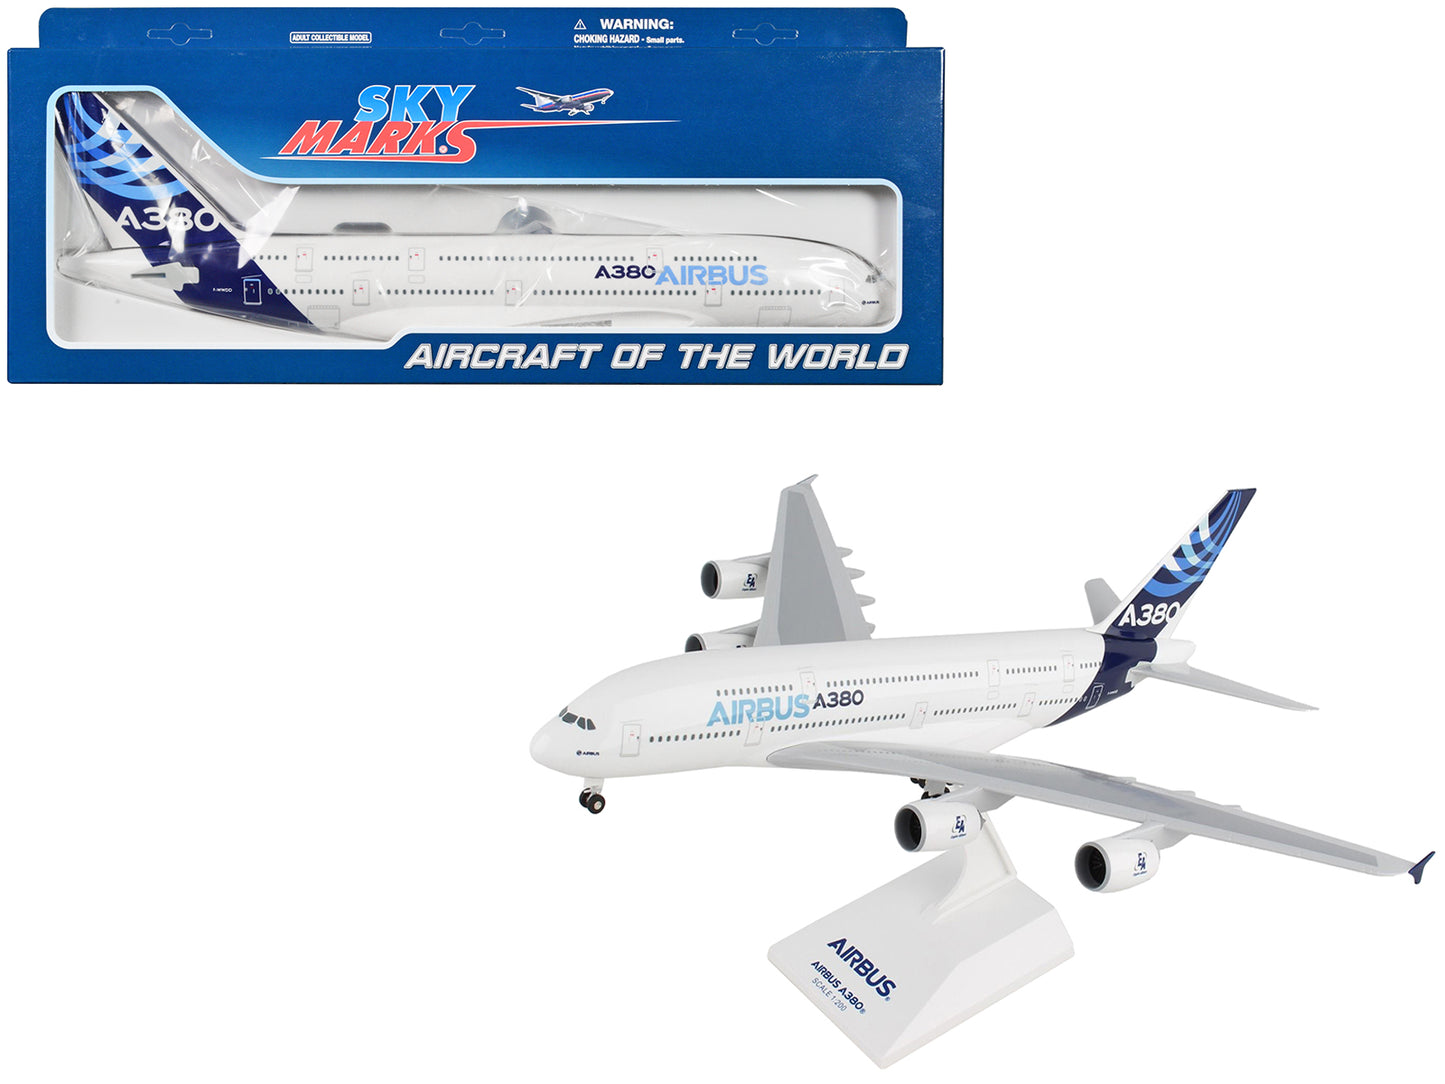 Airbus A380-800 Commercial Aircraft "Airbus" (F-WWDD) White with Dark Blue Tail (Snap-Fit) 1/200 Plastic Model by Skymarks